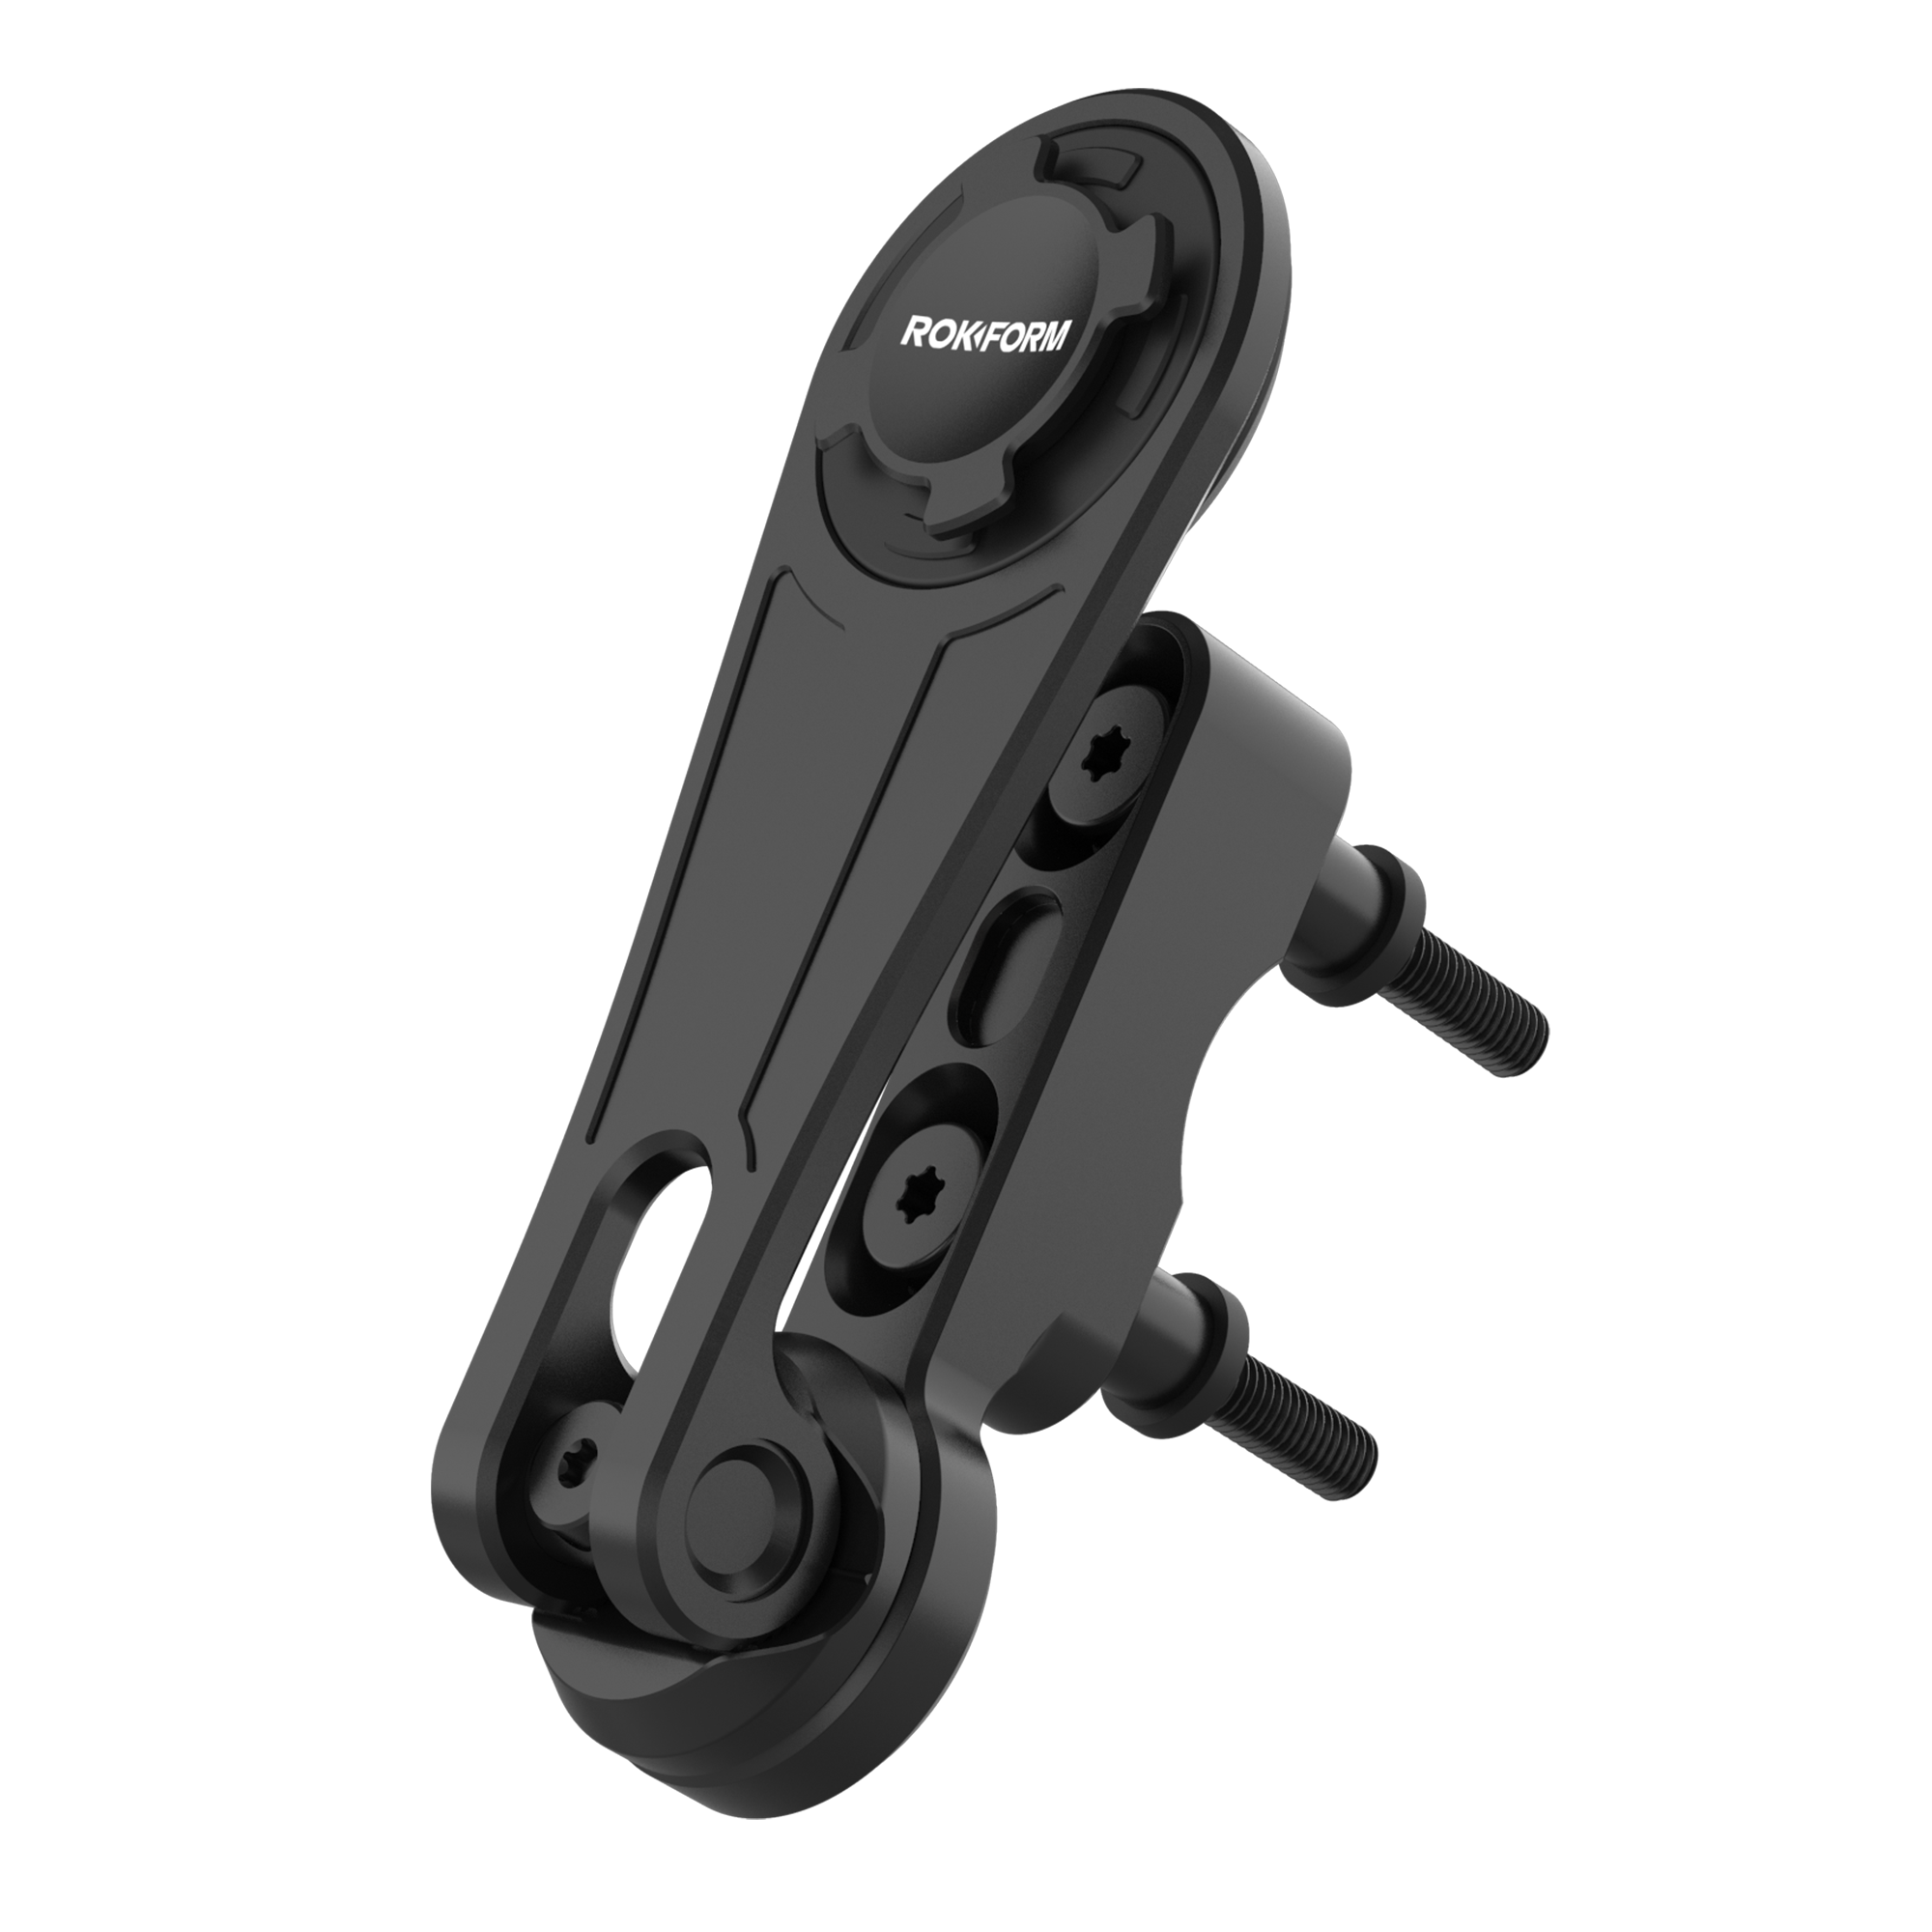 Motorcycle Perch Phone Mount